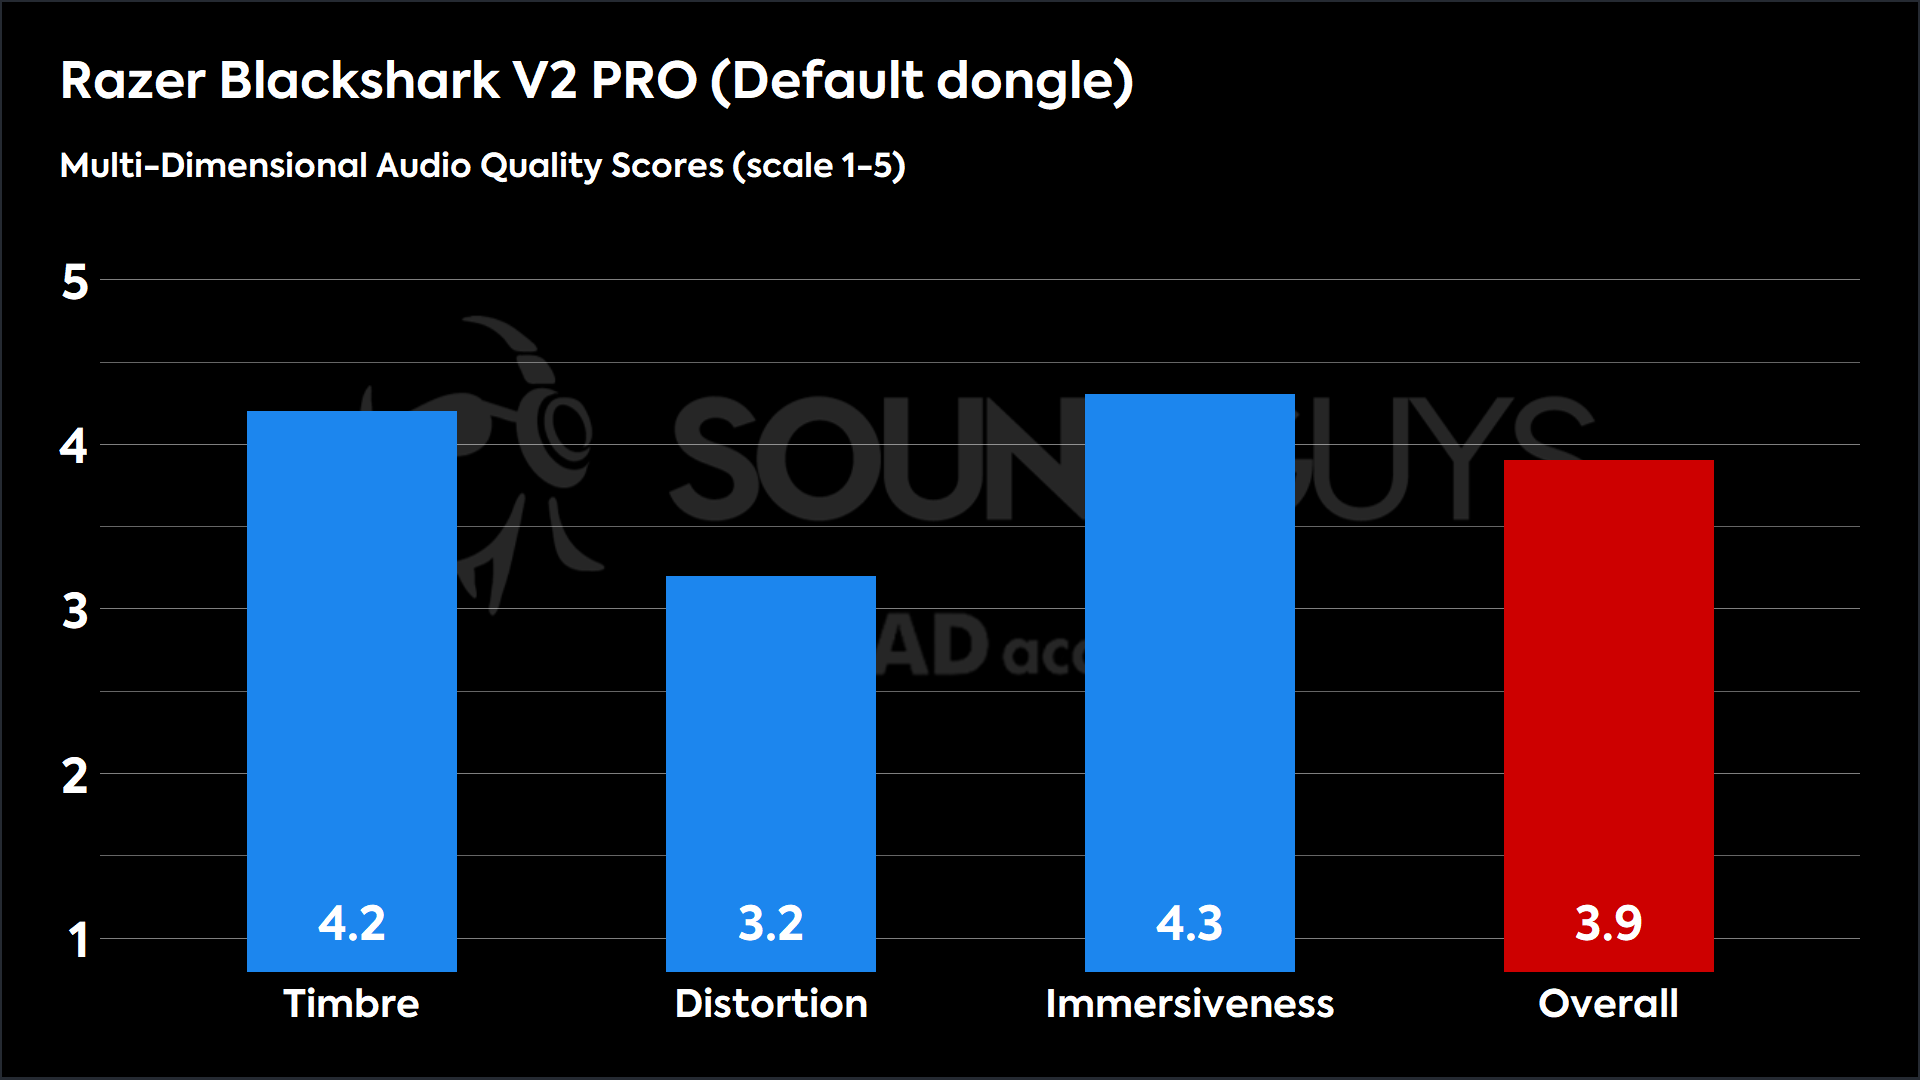 This chart shows the MDAQS results for the Razer Blackshark V2 PRO in Default dongle mode. The Timbre score is 4.2, The Distortion score is 3.2, the Immersiveness score is 4.3, and the Overall Score is 3.9).